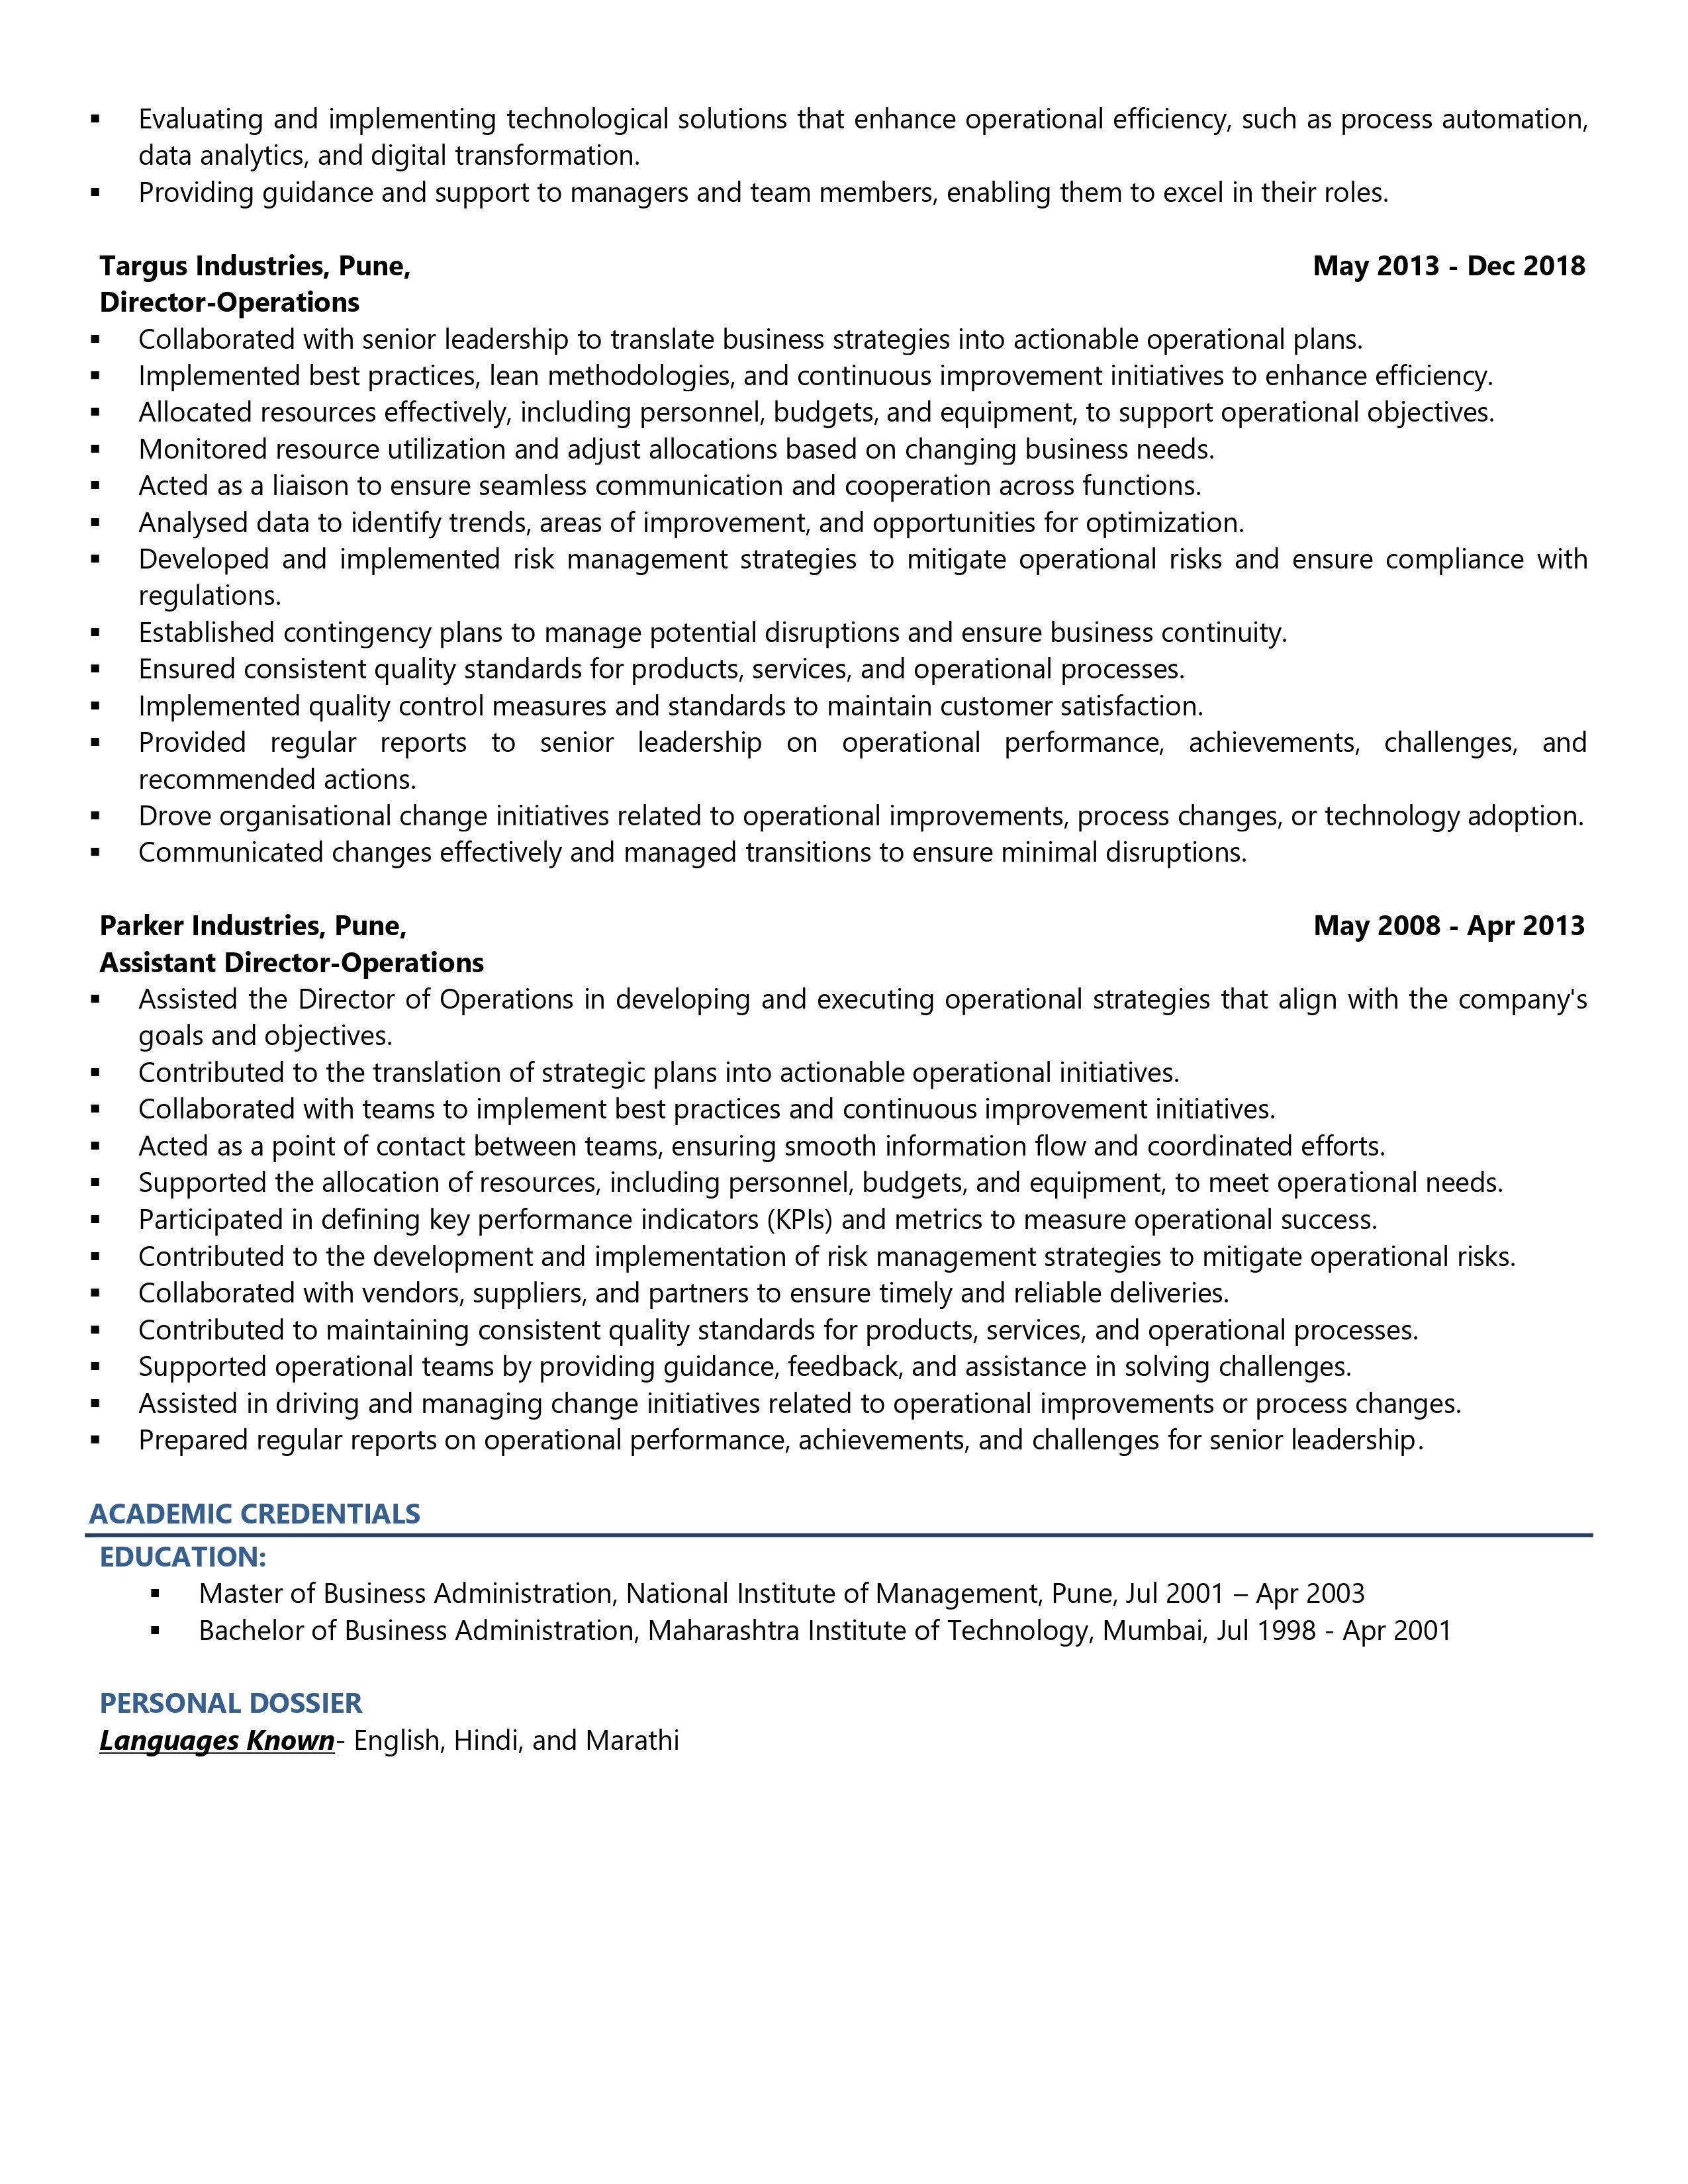 VP-Operations - Resume Example & Template